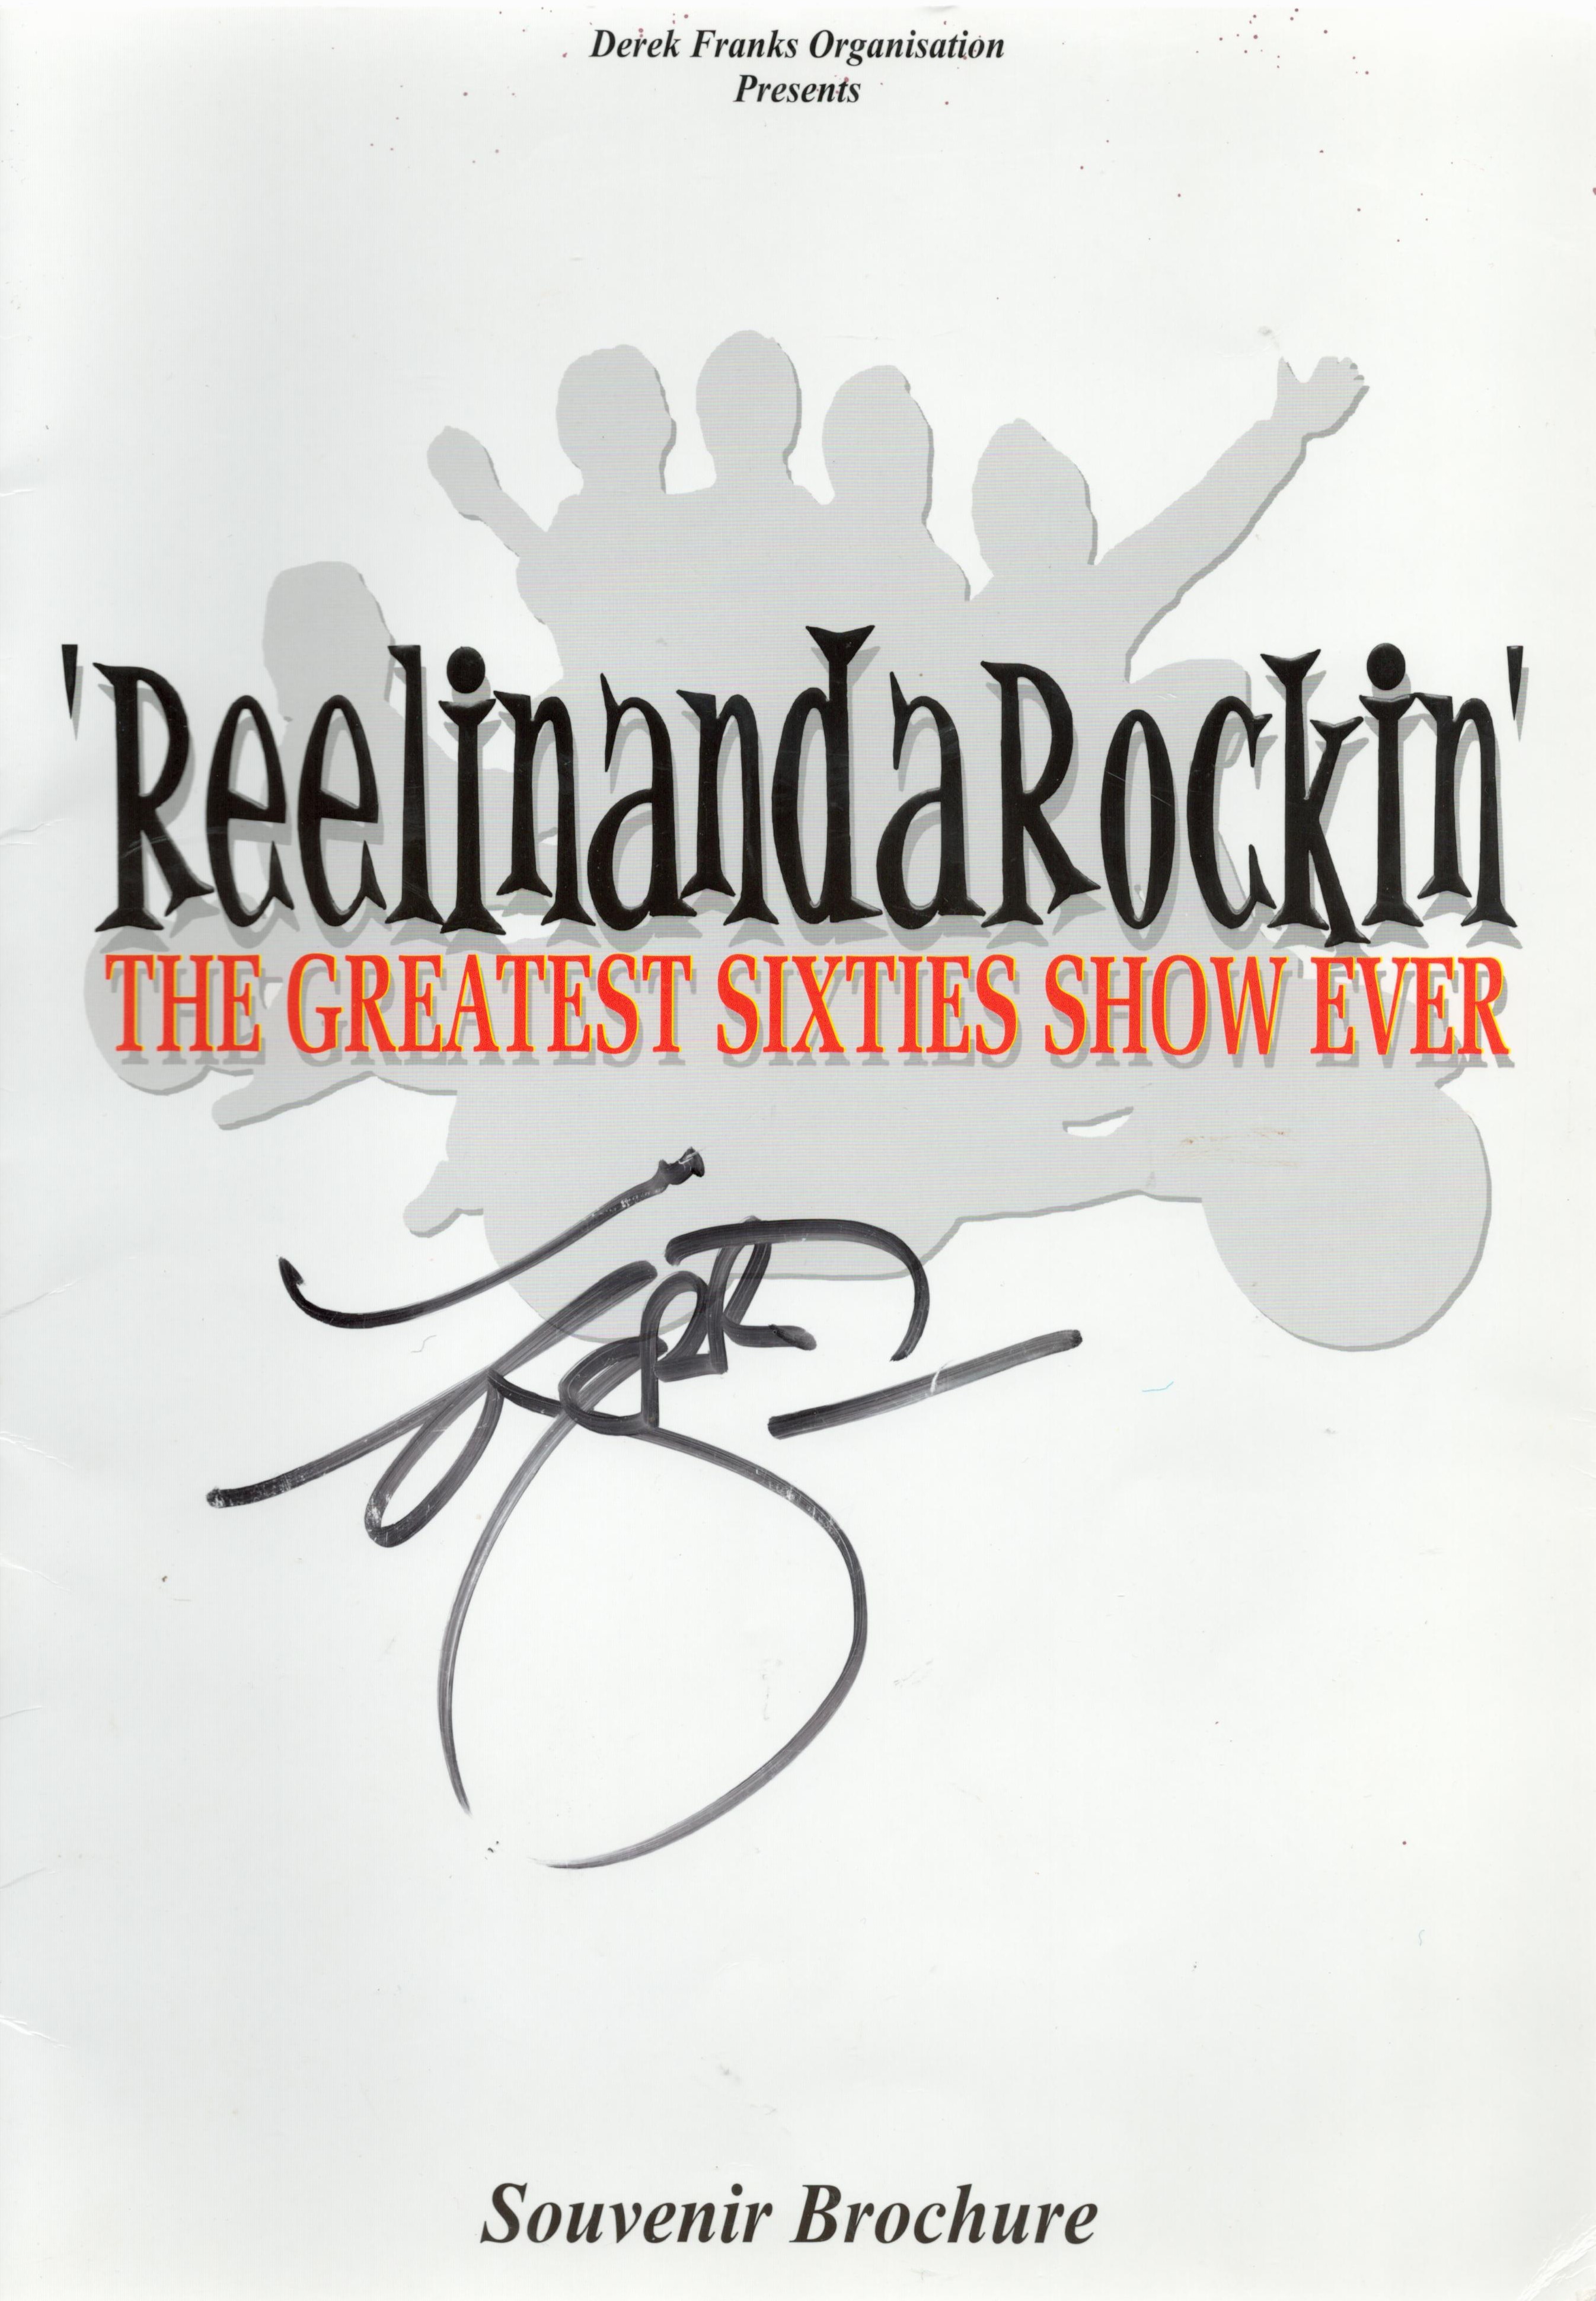 Gerry Marsden, Mike Pender and Brian Poole Signed ReelinandaRocking- The Greatest Sixties Show